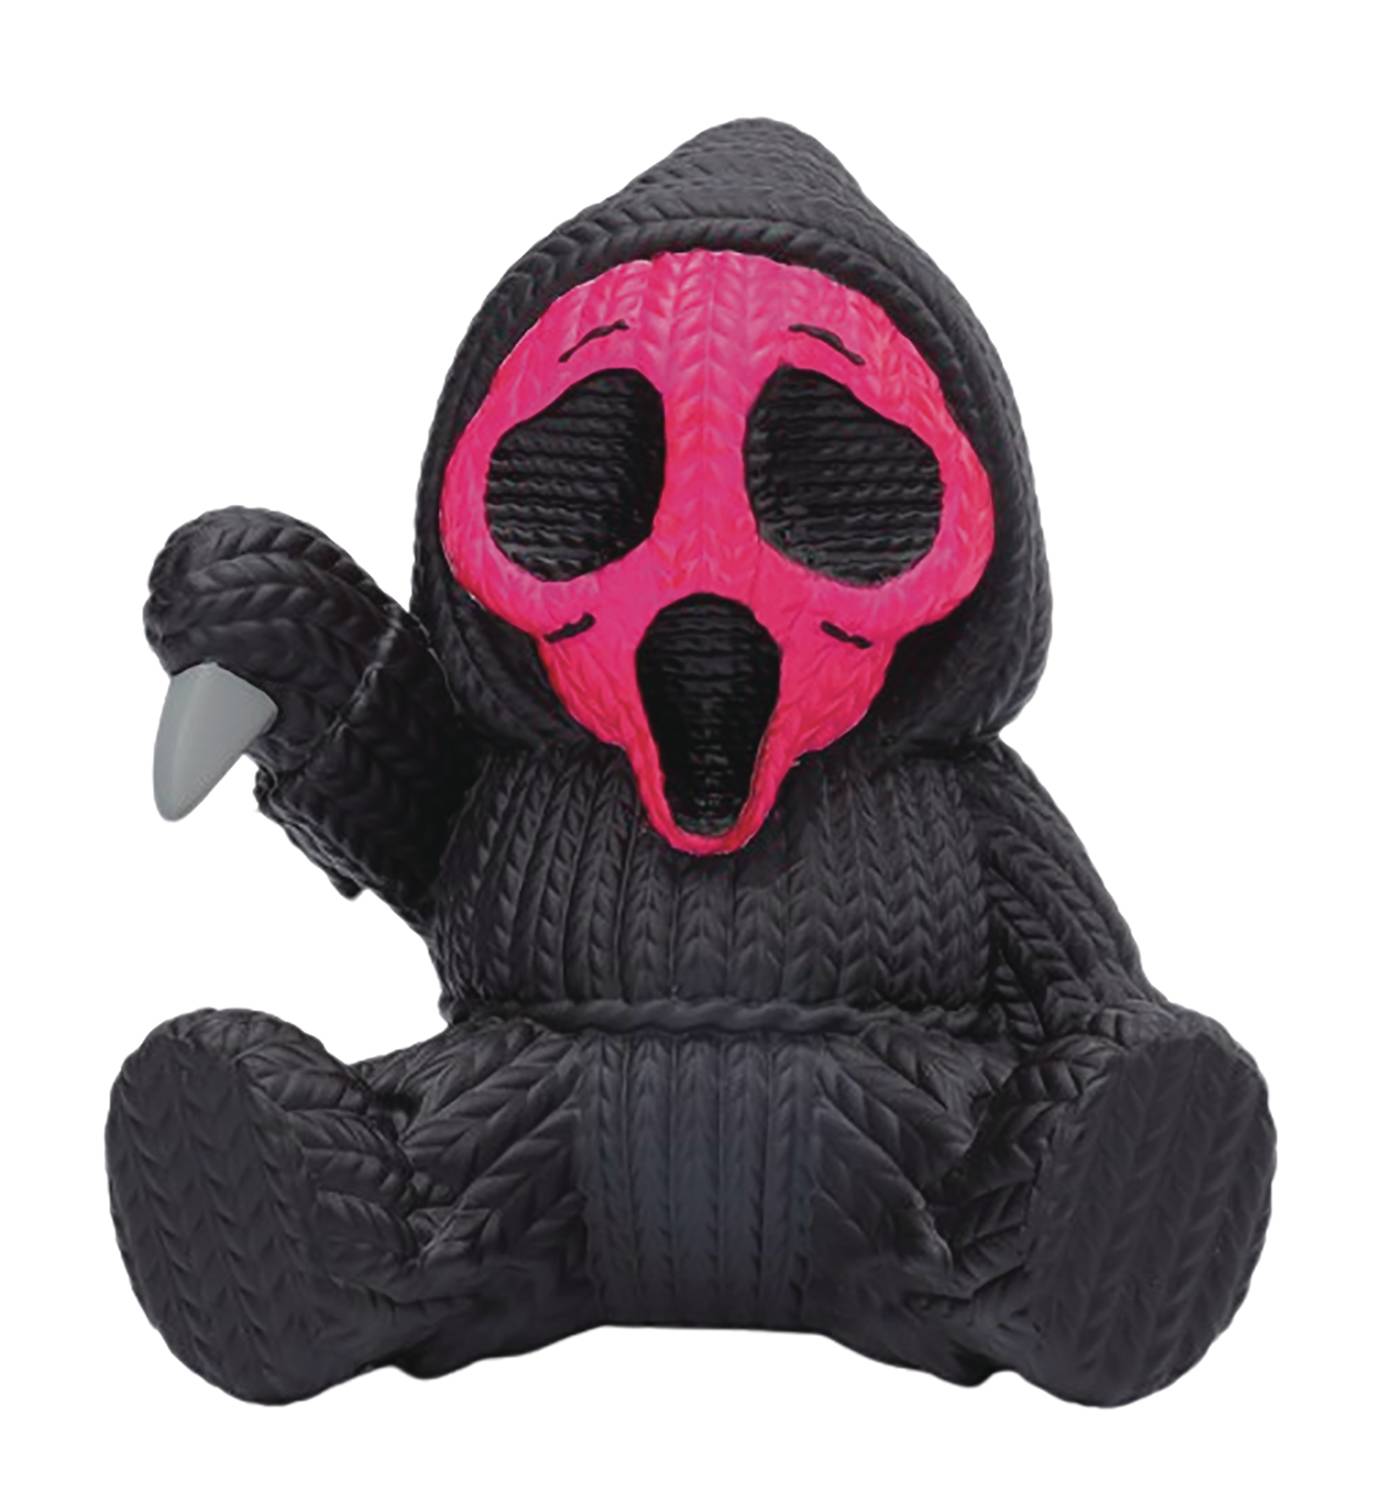 GHOST FACE FLUORESCENT PINK HMBR 6IN VINYL FIG